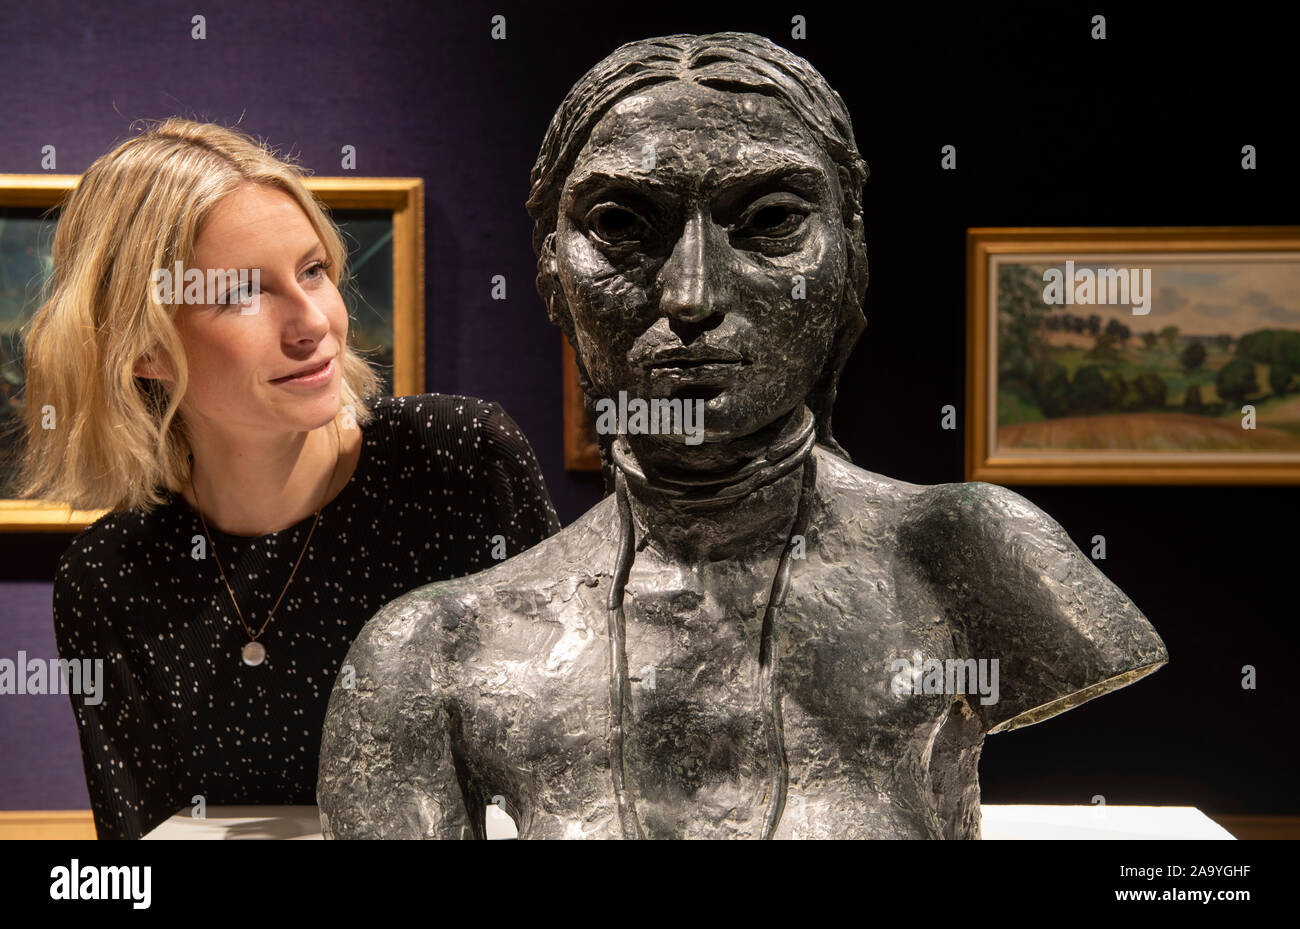 Bonhams, London, UK. 18th November 2019. Paul Nash, L.S Lowry, Paul Henry, Sickert and John Piper among the artists featured in the sale which takes place 20th November. Image: Sir Jacob Epstein (British, 1880-1959). Third Portrait Bust of Sunita (Bust with Necklace). £7,000-10,000. Credit: Malcolm Park/Alamy Live News. Stock Photo